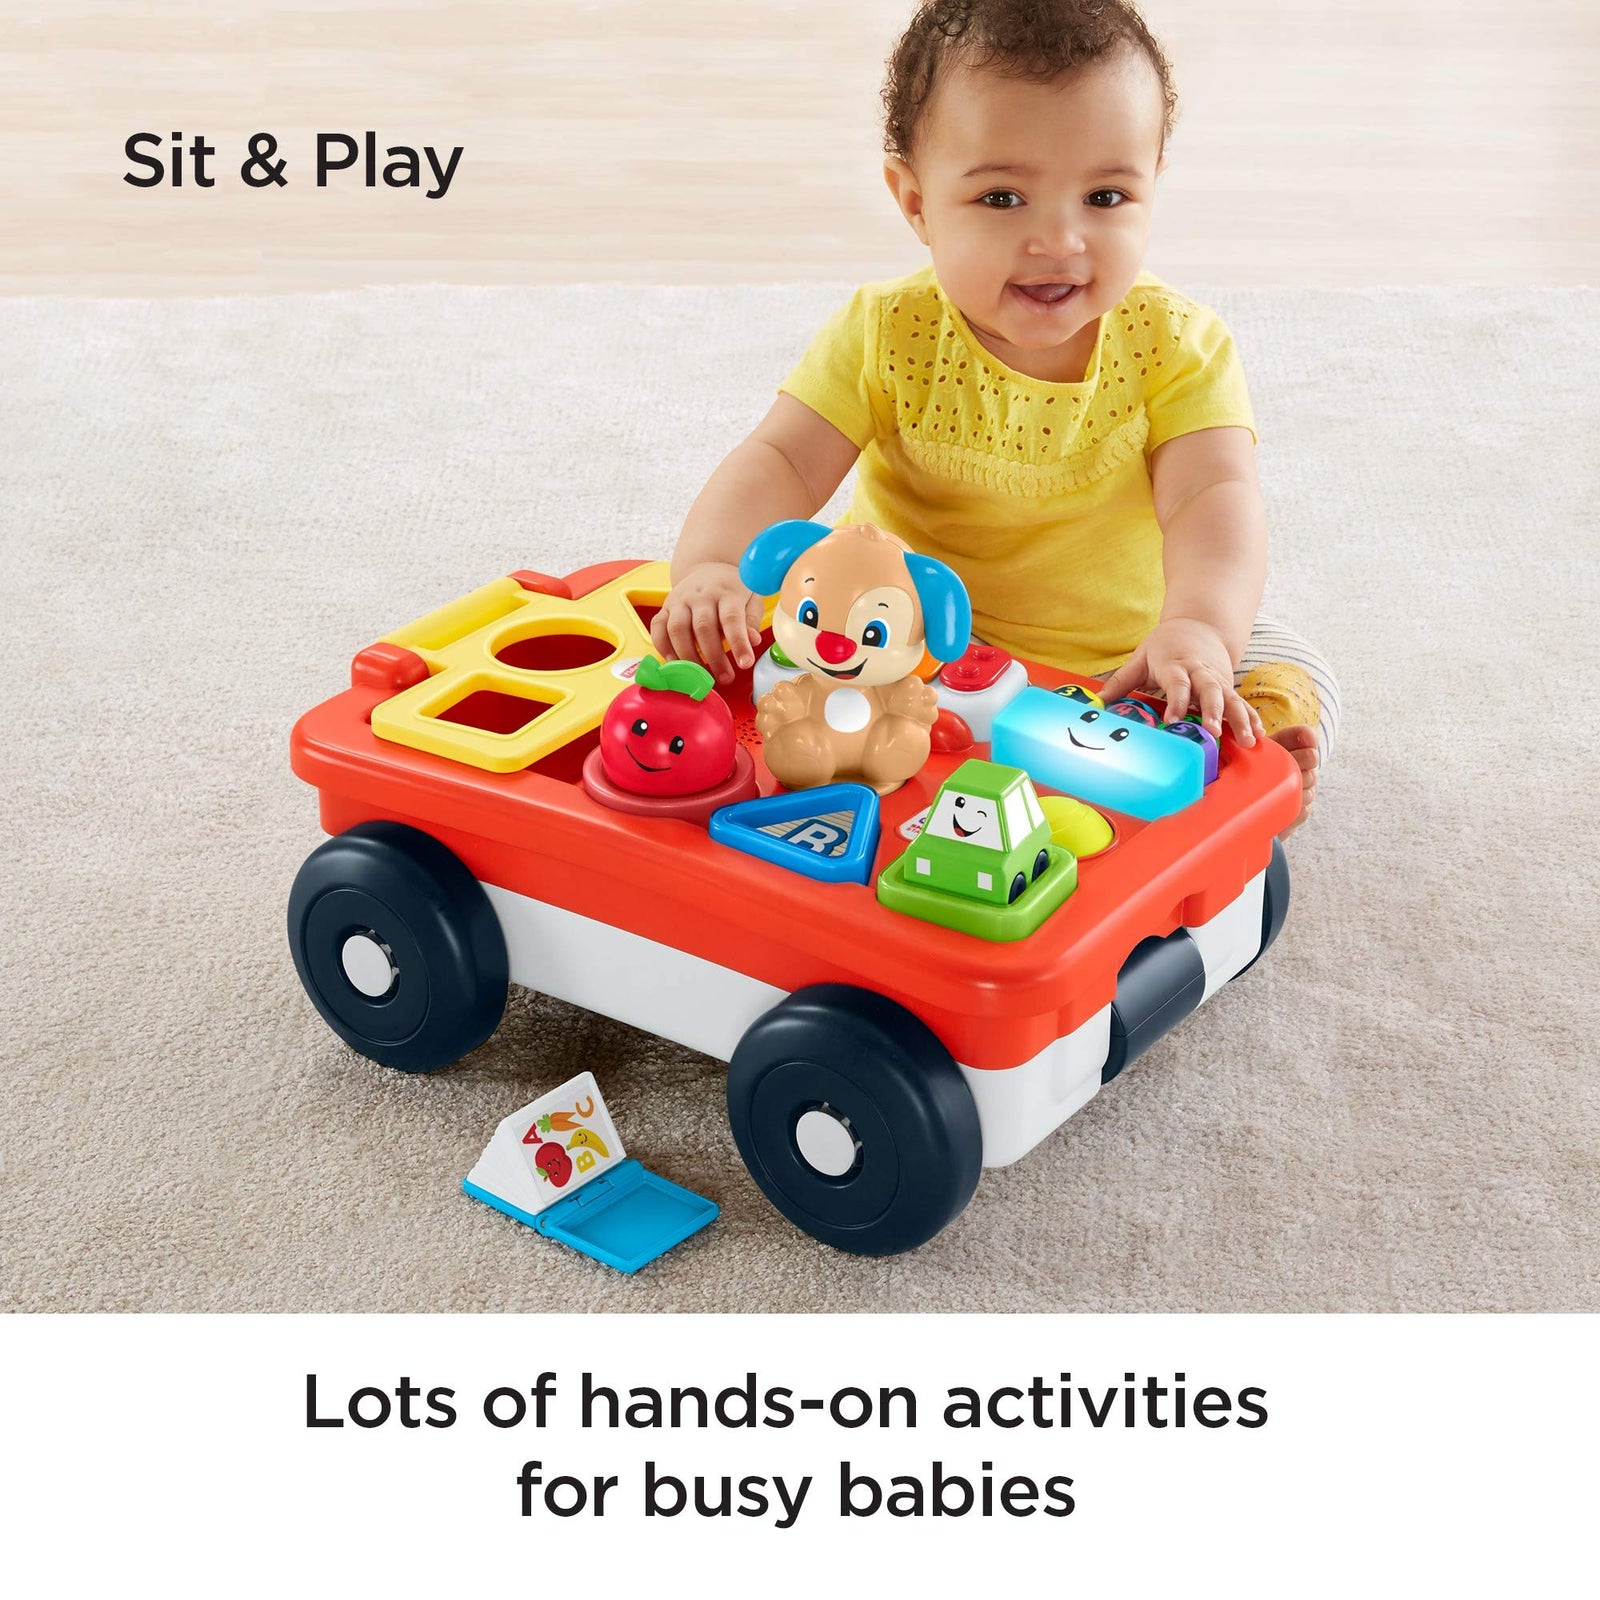 Fisher-Price Laugh & Learn Pull & Play Learning Wagon, pull-toy wagon with music, lights, and learning songs for babies & toddlers ages 6-36 months [Amazon Exclusive]